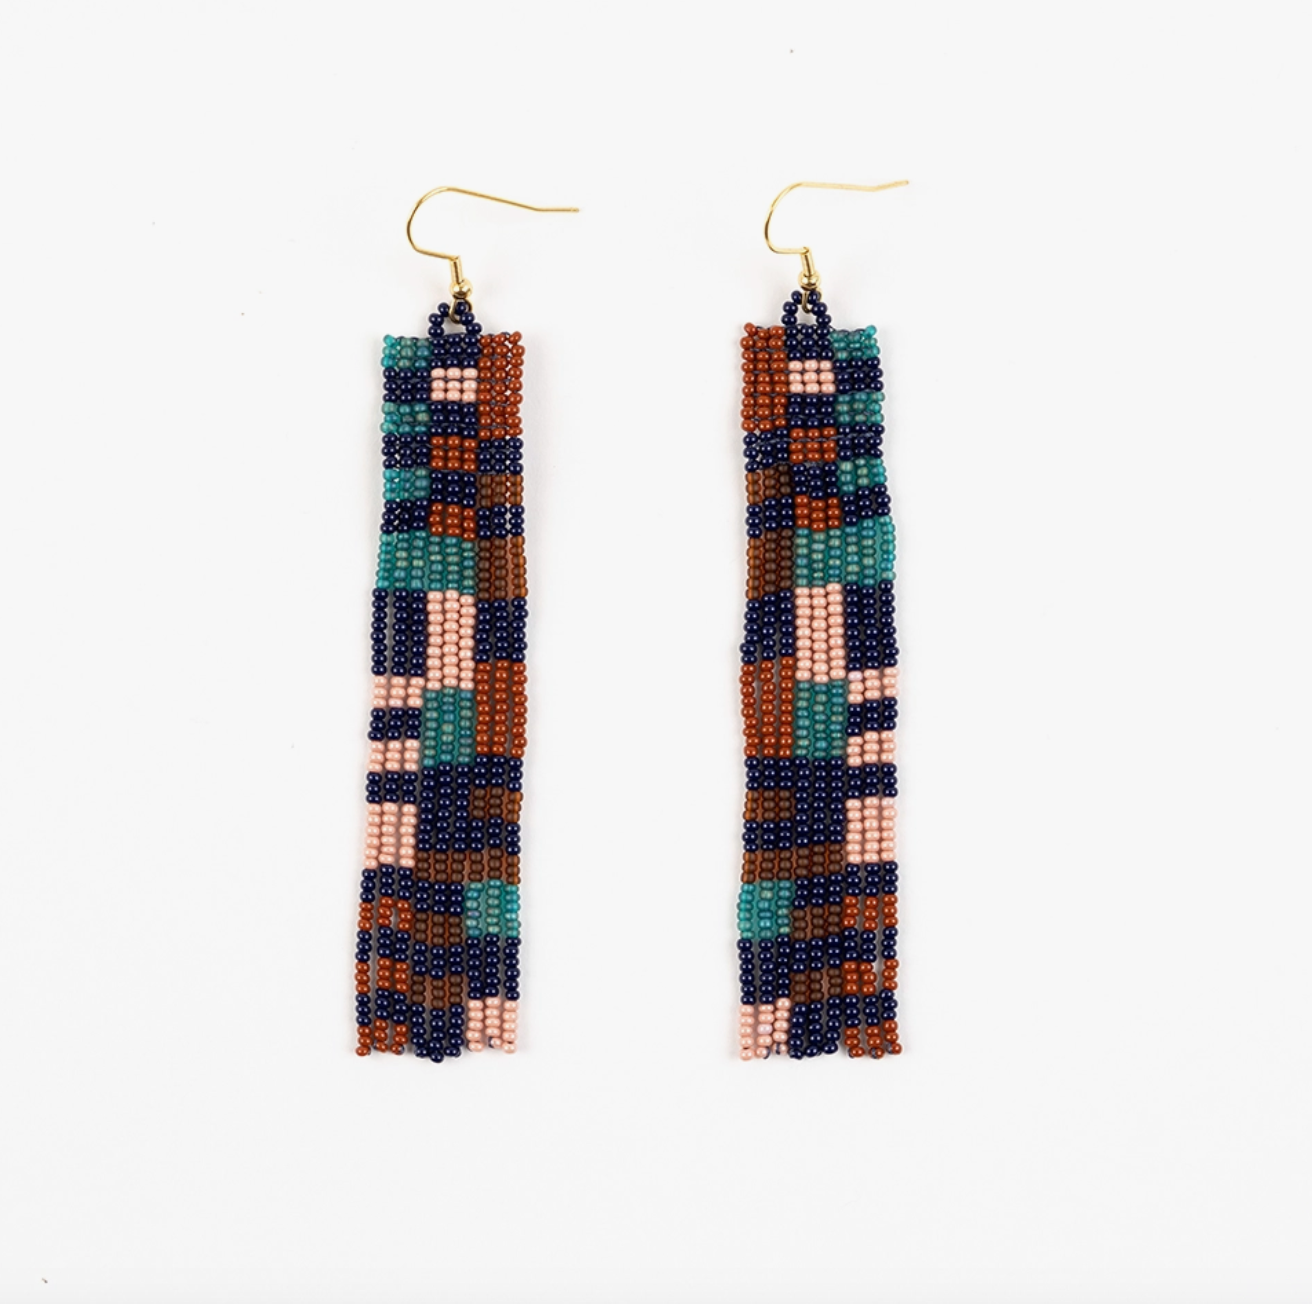 Long hand beaded earrings in blue, teal, rust and pink.